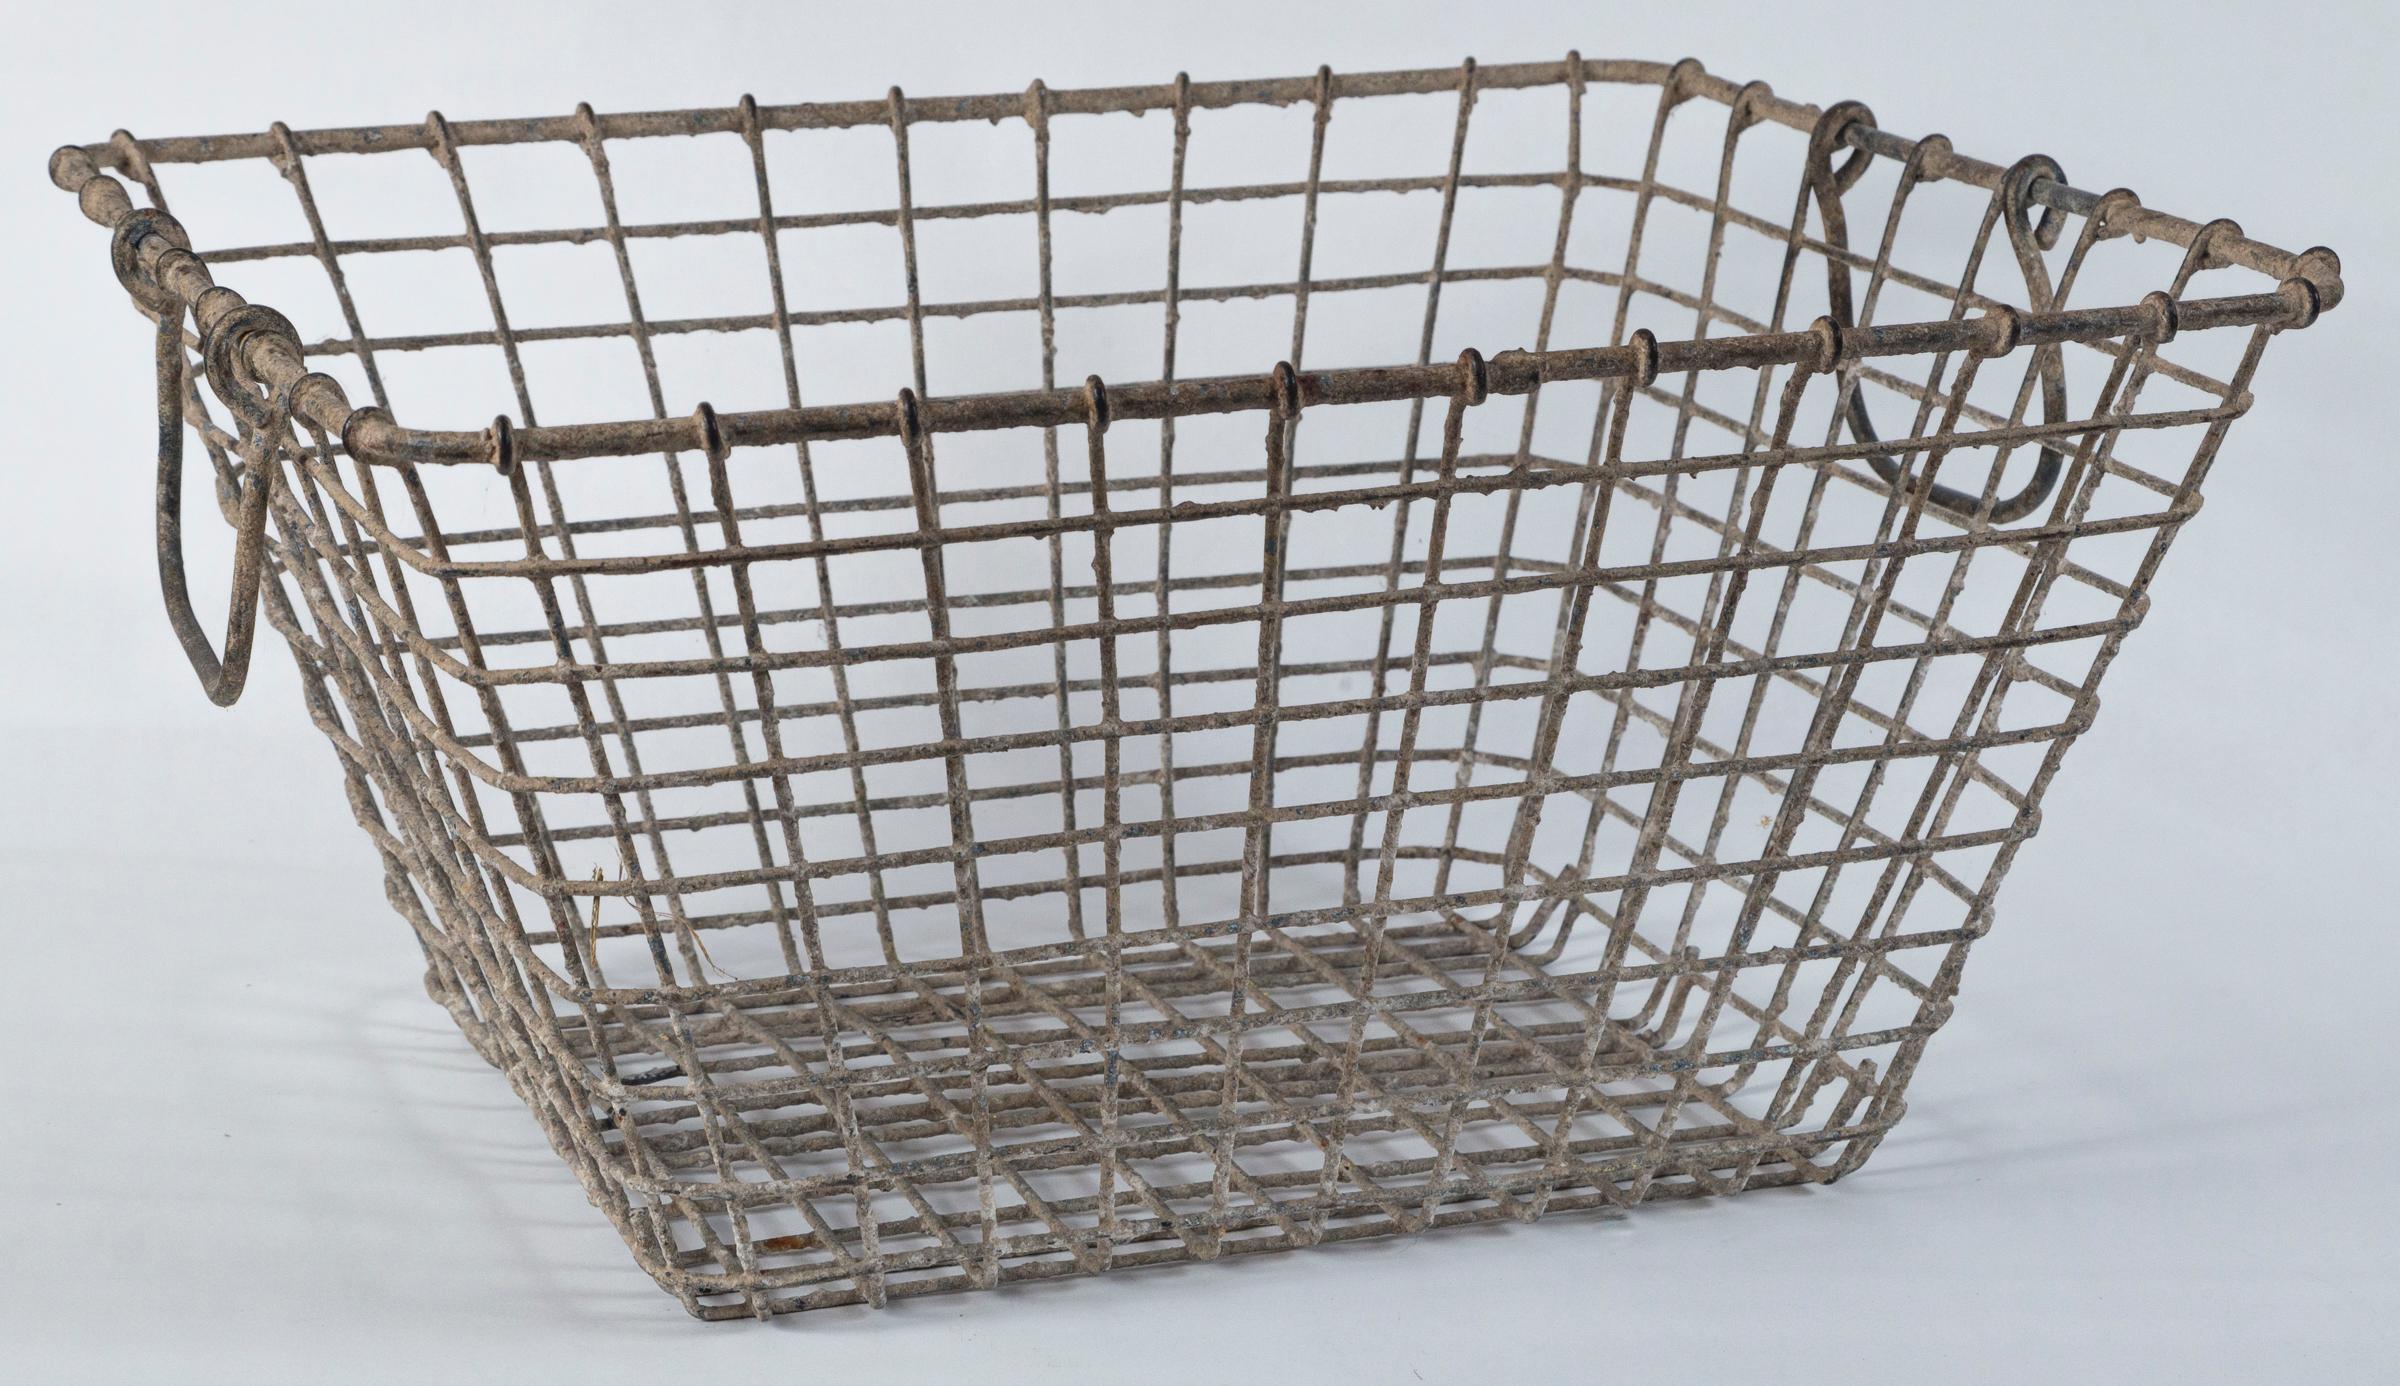 Vintage French oyster baskets - Set of two, 20th century. Used by French oyster farmers at low tide for harvest. Aged patina.